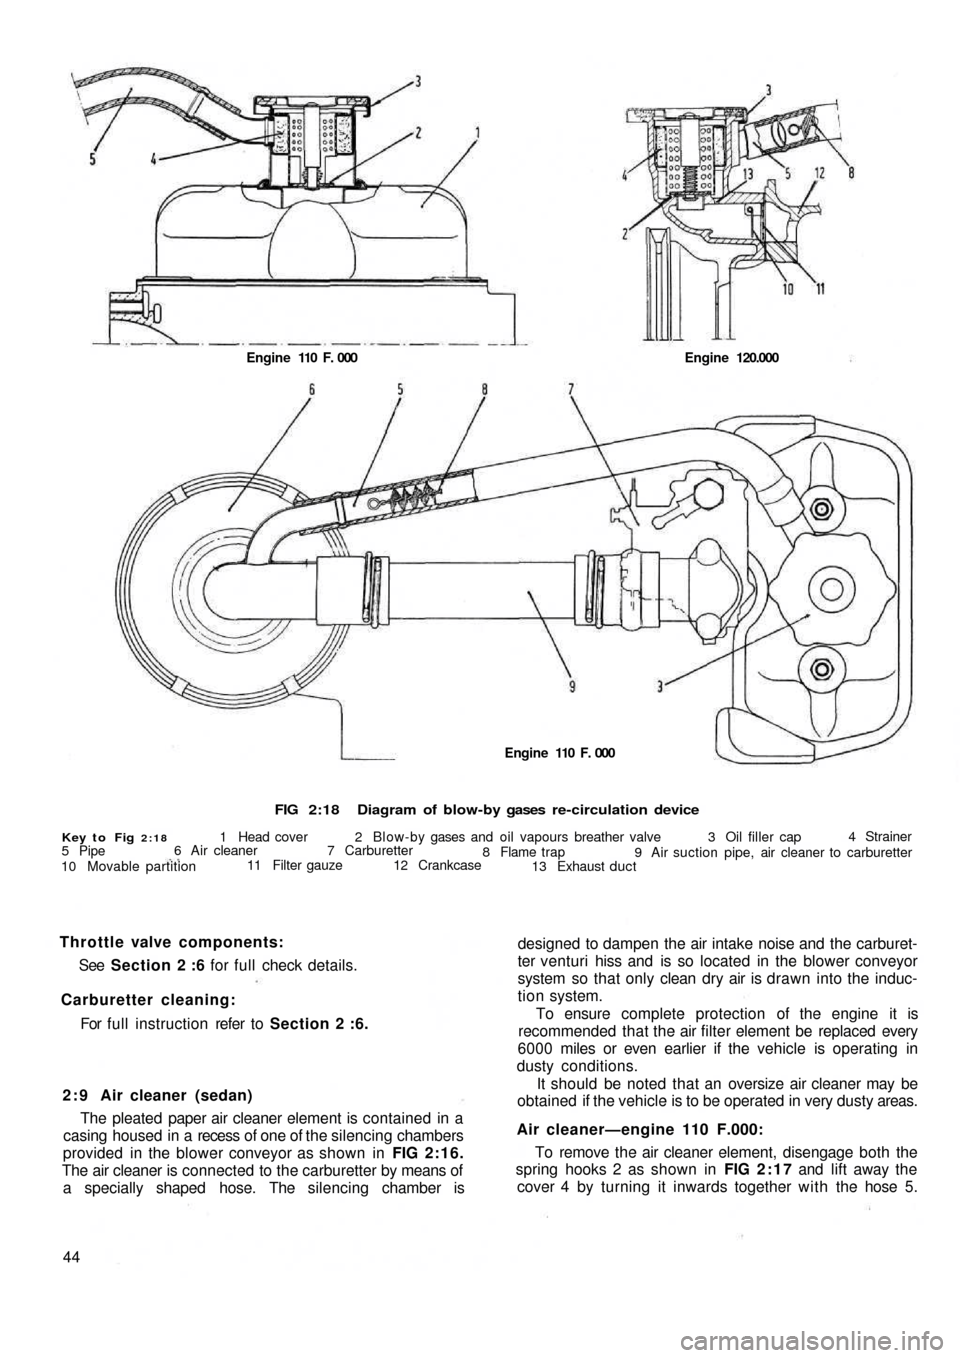 FIAT 500 1959 1.G Workshop Manual FIG 2:18Diagram of blow-by gases  re-circulation device
Key to Fig 2:181 Head cover 2 Blow-by gases and  oil vapours breather valve 3 Oil filler cap4 Strainer
9 Air suction pipe, air cleaner to carbur